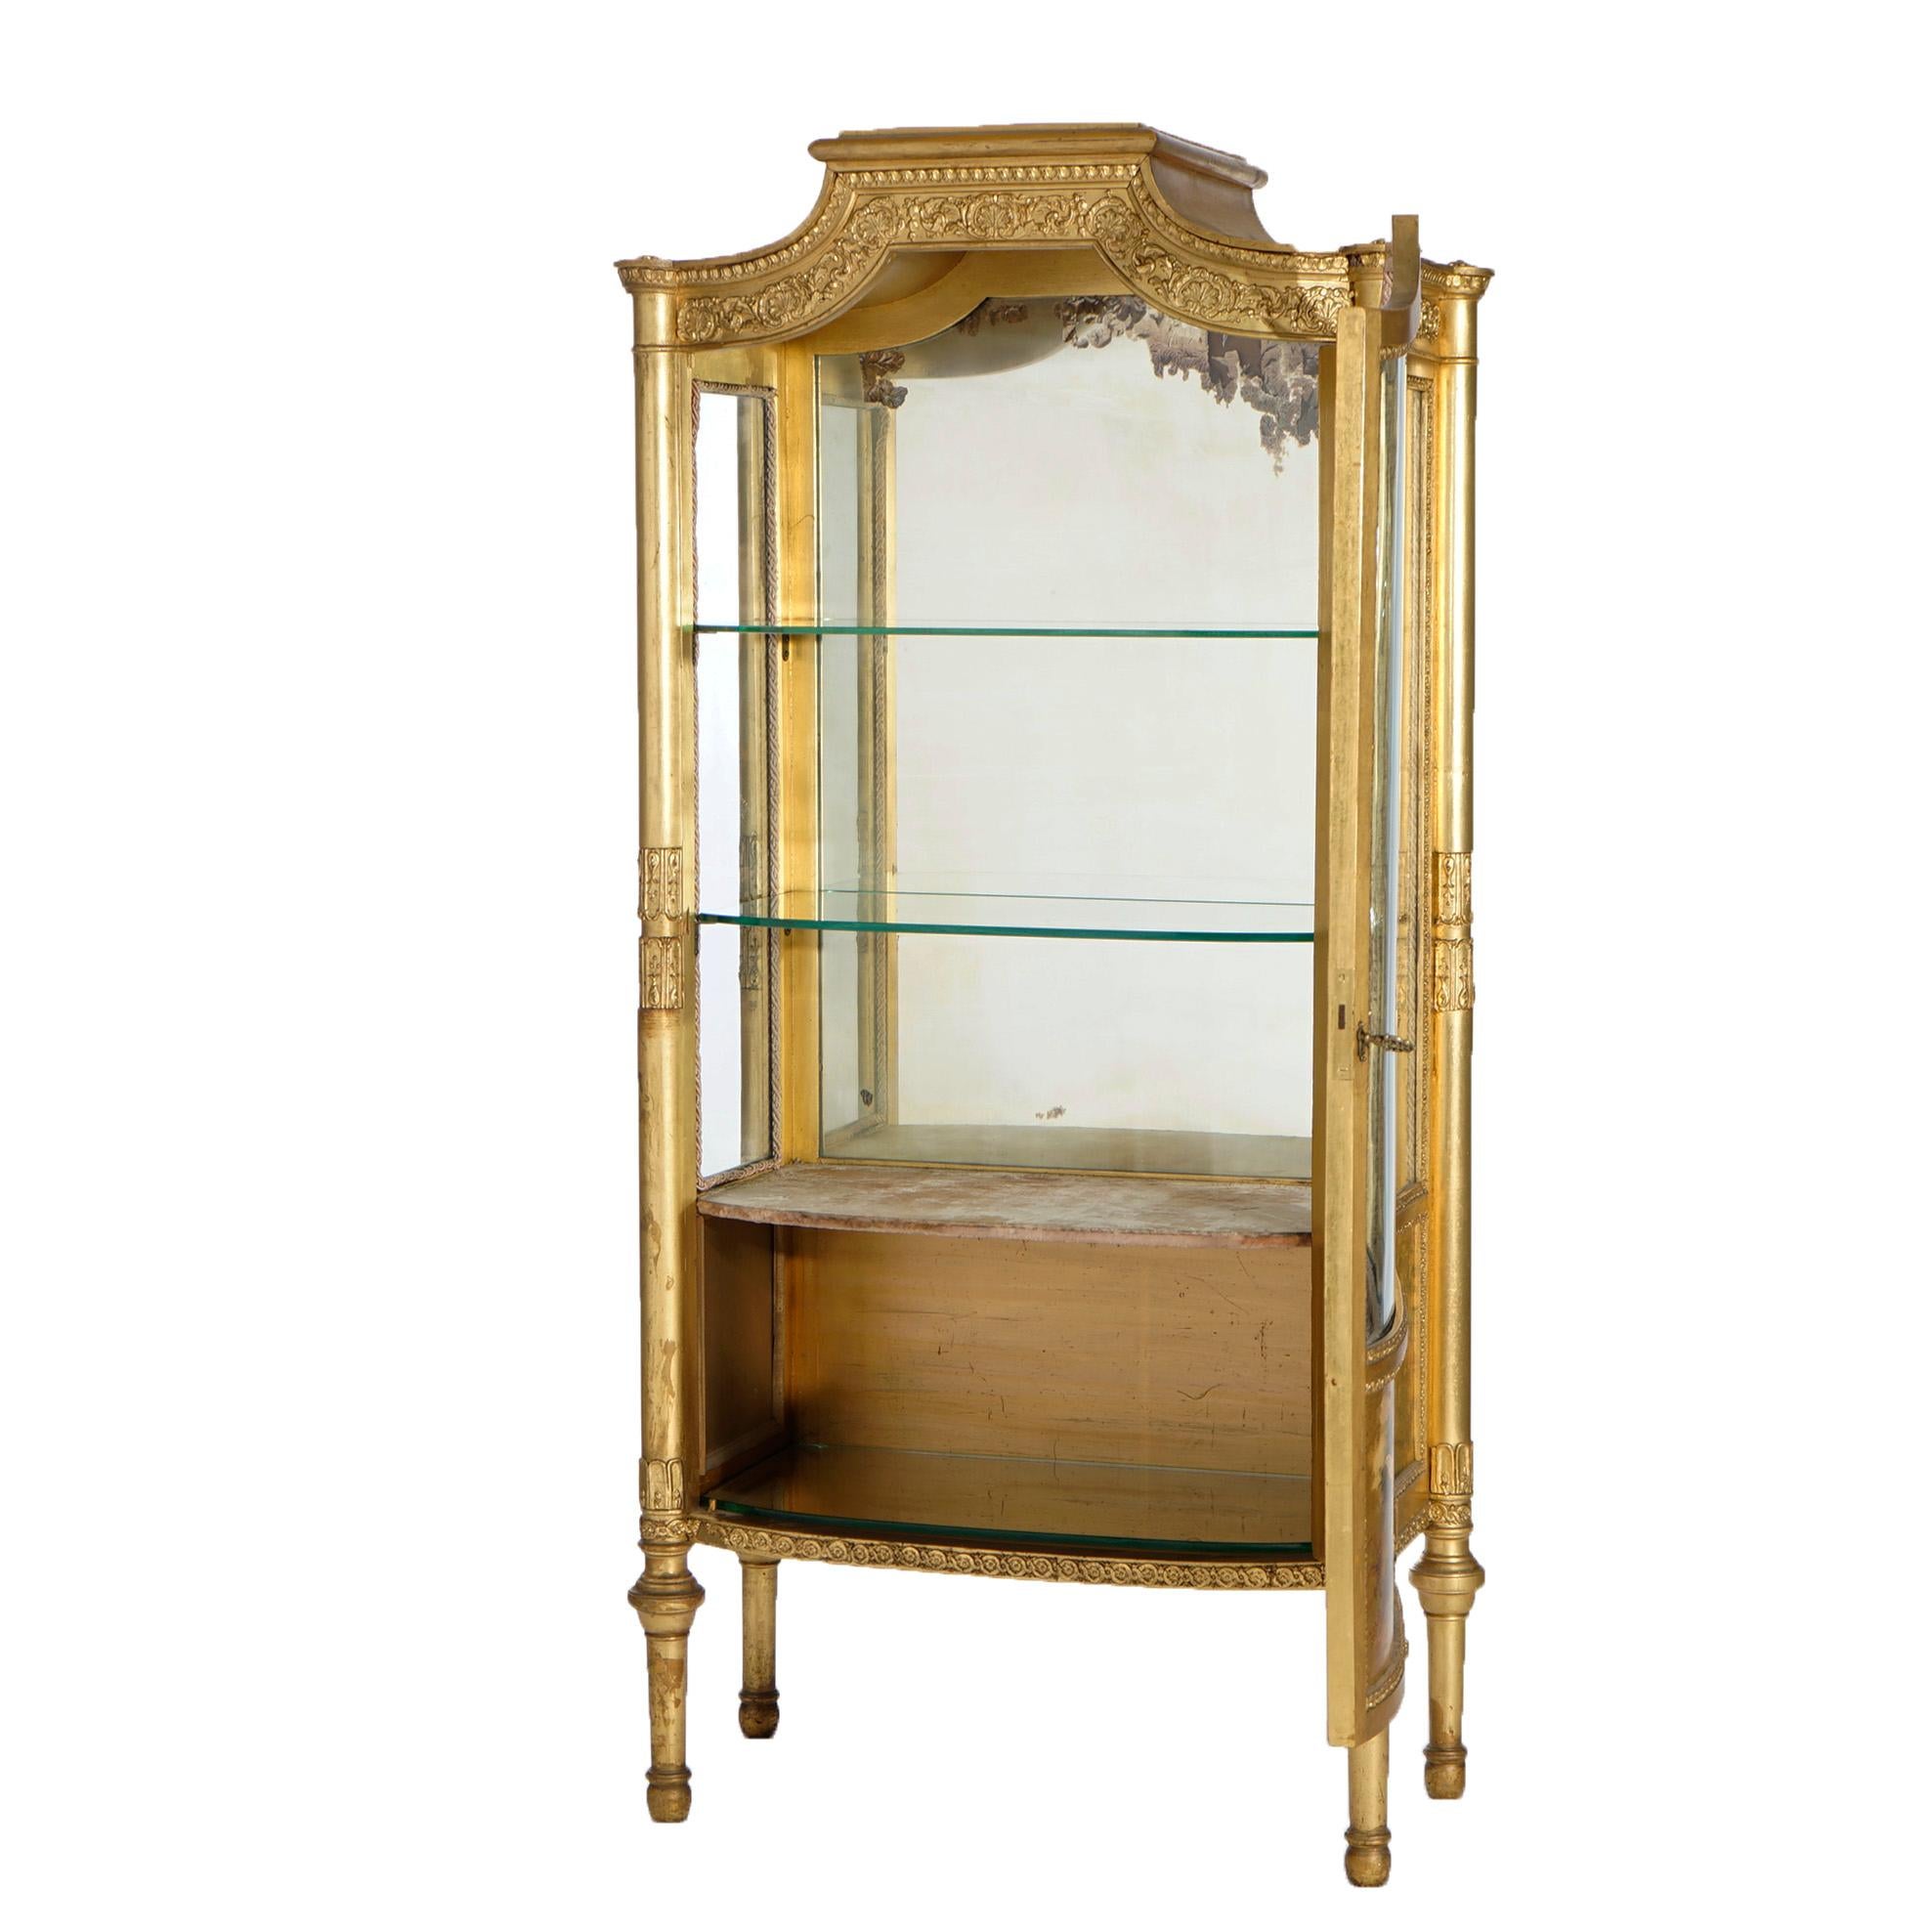 An antique French vitrine offers giltwood construction with pagoda form crest having floral and foliate elements over case with single glass door opening to shelved and mirrored interior, Vernis Martin Classical scene with woman and cherubs in